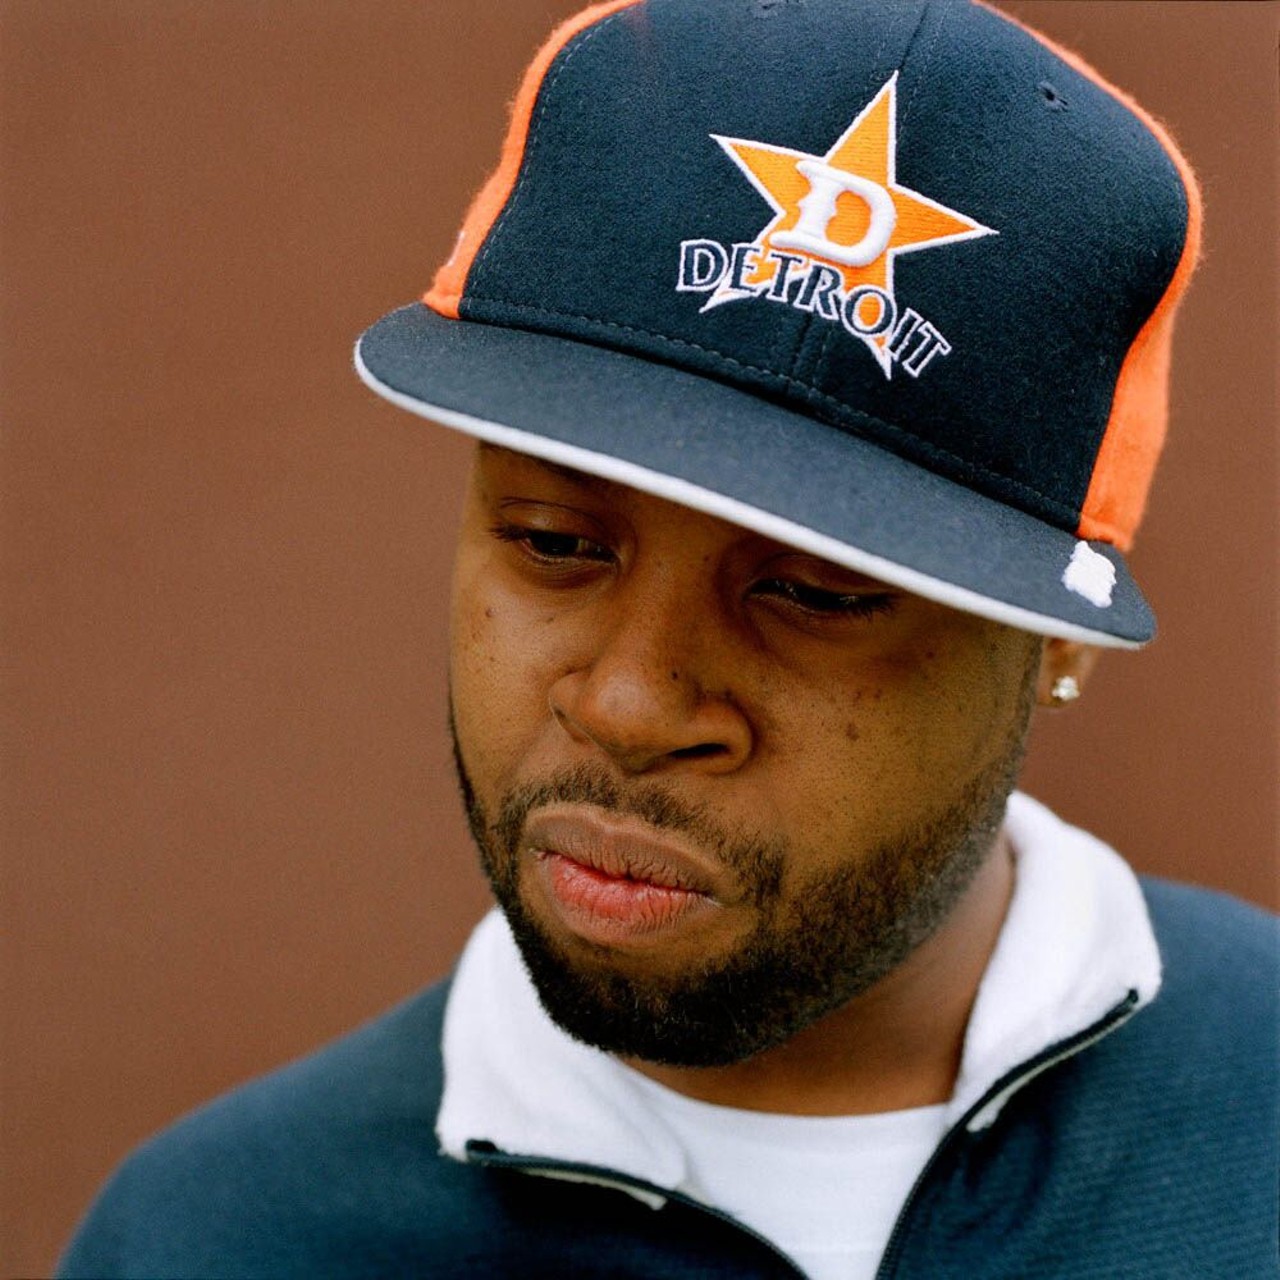 J Dilla
Renowned as a groundbreaking figure in hip-hop production, J Dilla, born James Dewitt Yancey, spent much of his life in Detroit. His innovative beats influenced an entire era of hip-hop, collaborating with icons such as Slum Village, the Pharcyde, Erykah Badu, and Common. Tragically, his career was cut short at 32 due to a rare blood disease. In 2021, Dilla Time: The Life and Afterlife of J Dilla, the Hip-Hop Producer Who Reinvented Rhythm was released, helping to introduce the visionary to a new generation.